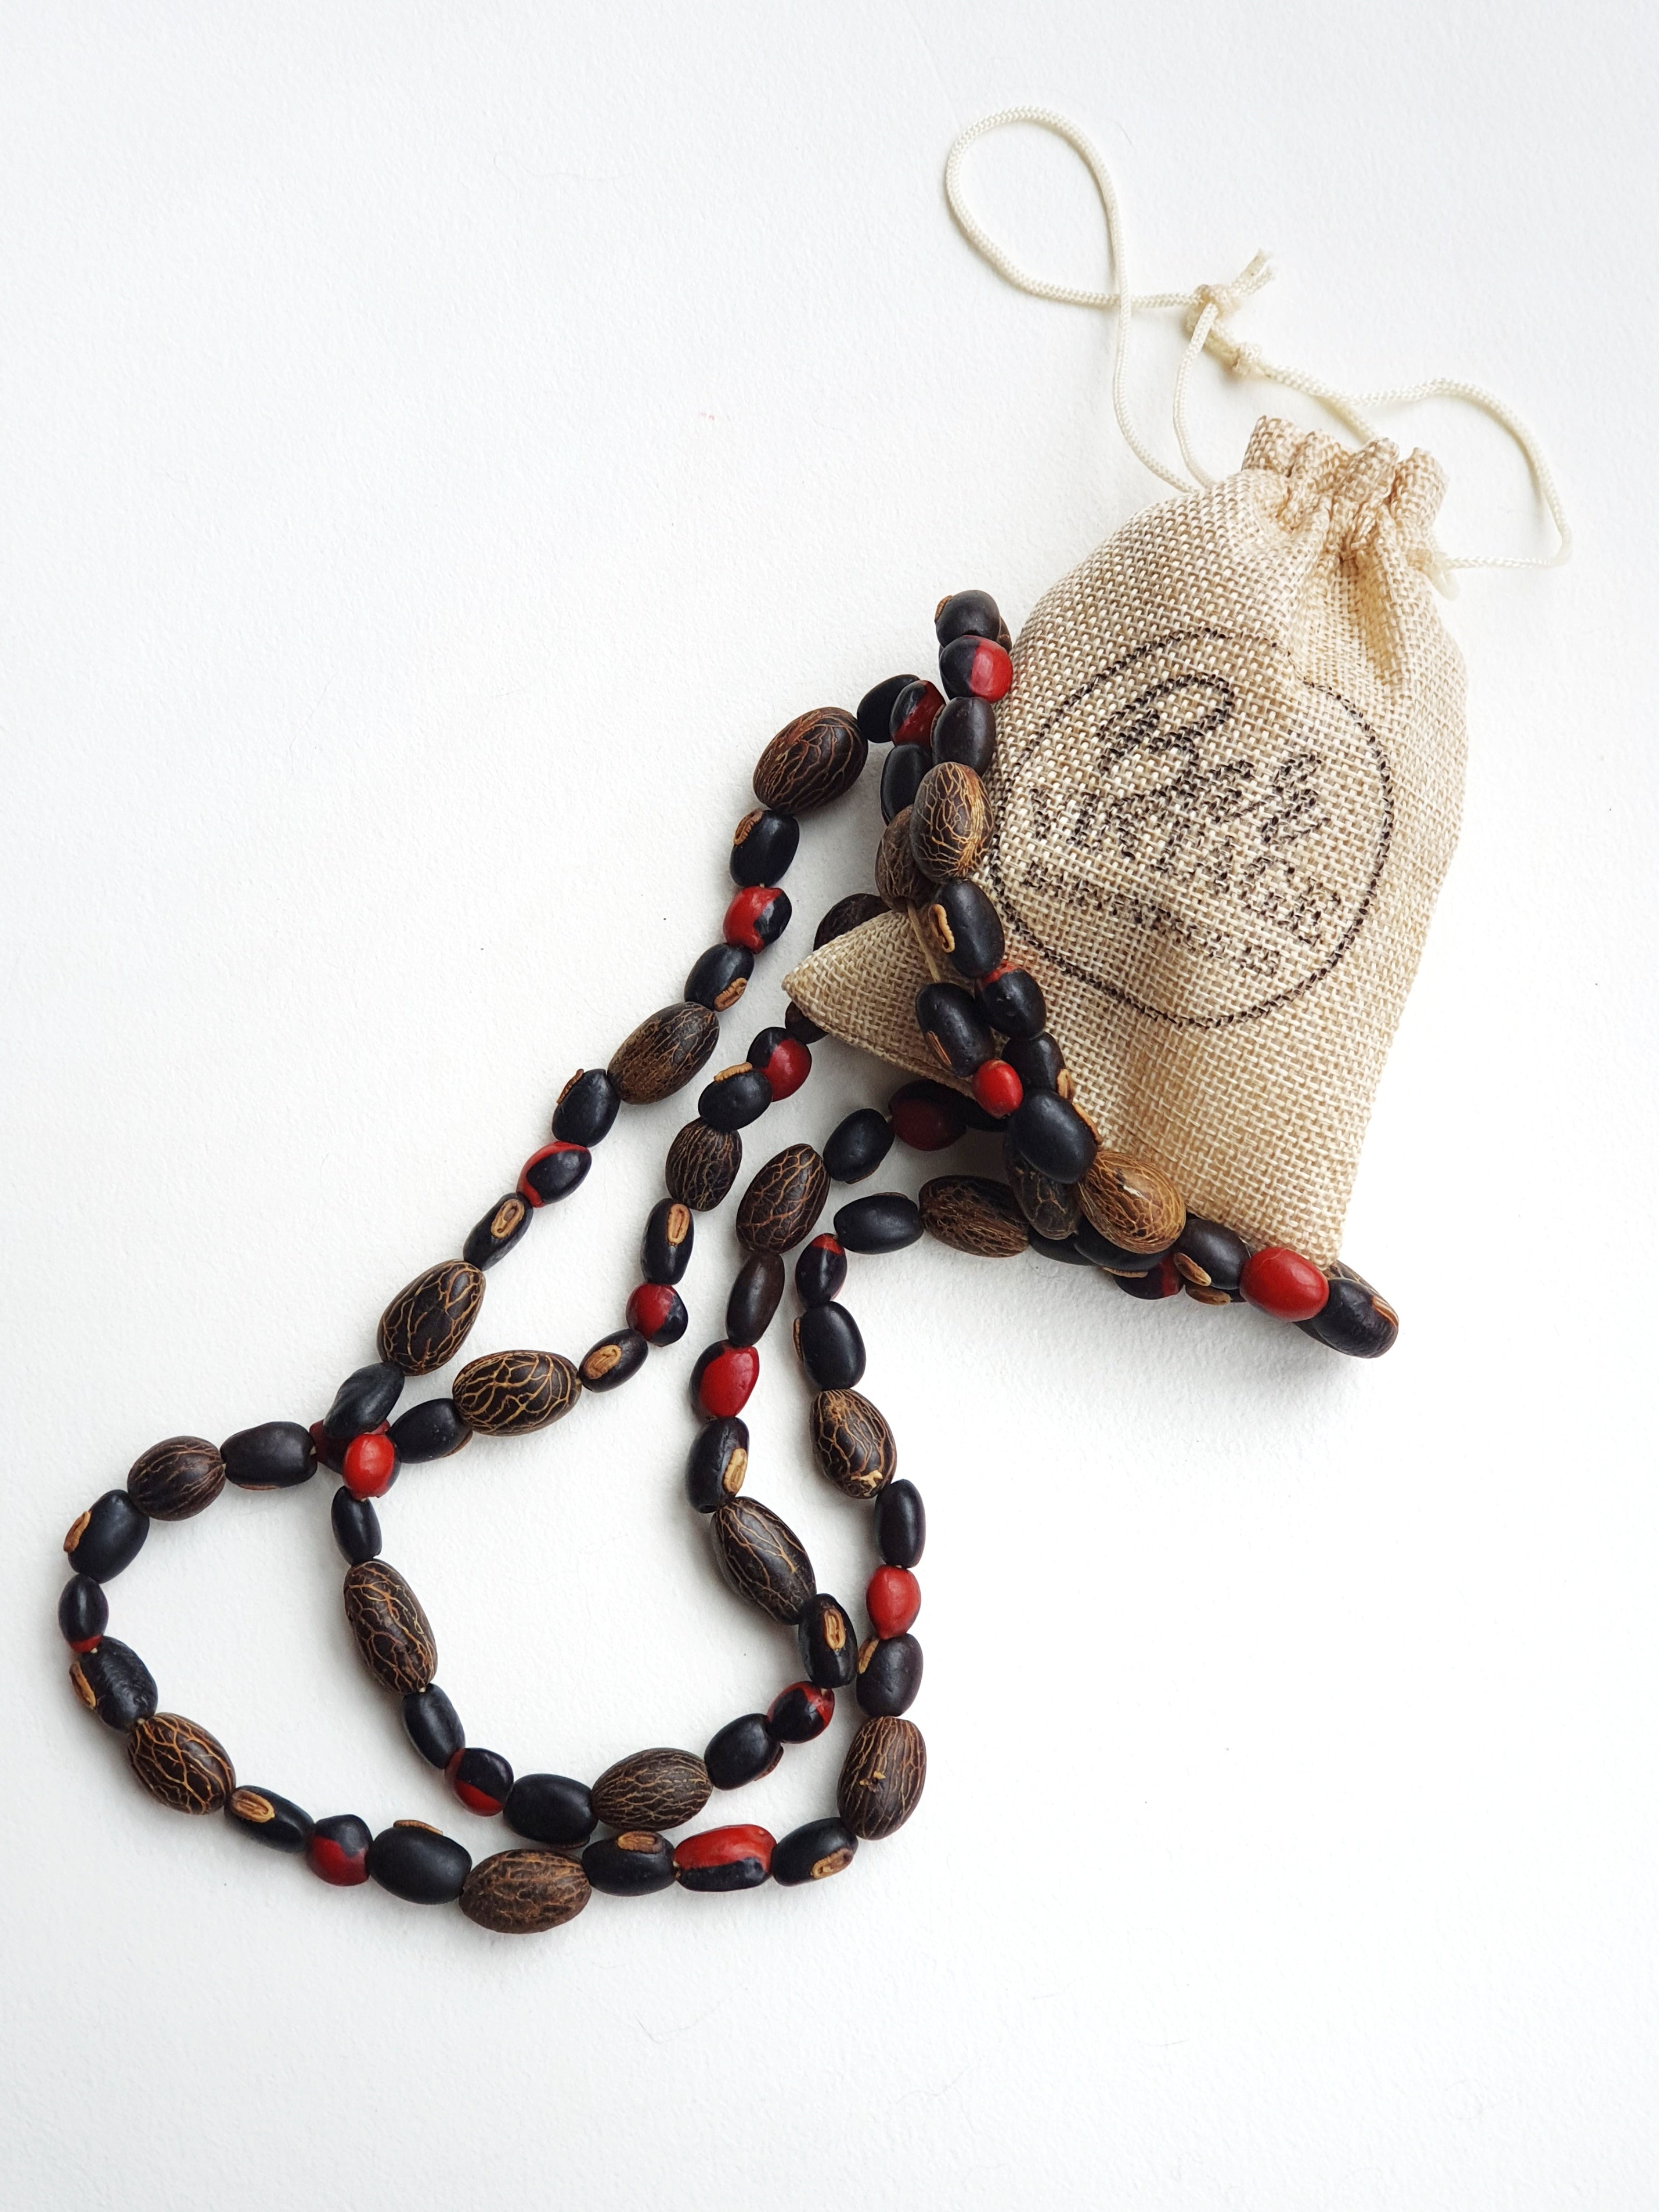 Vintage seed necklace